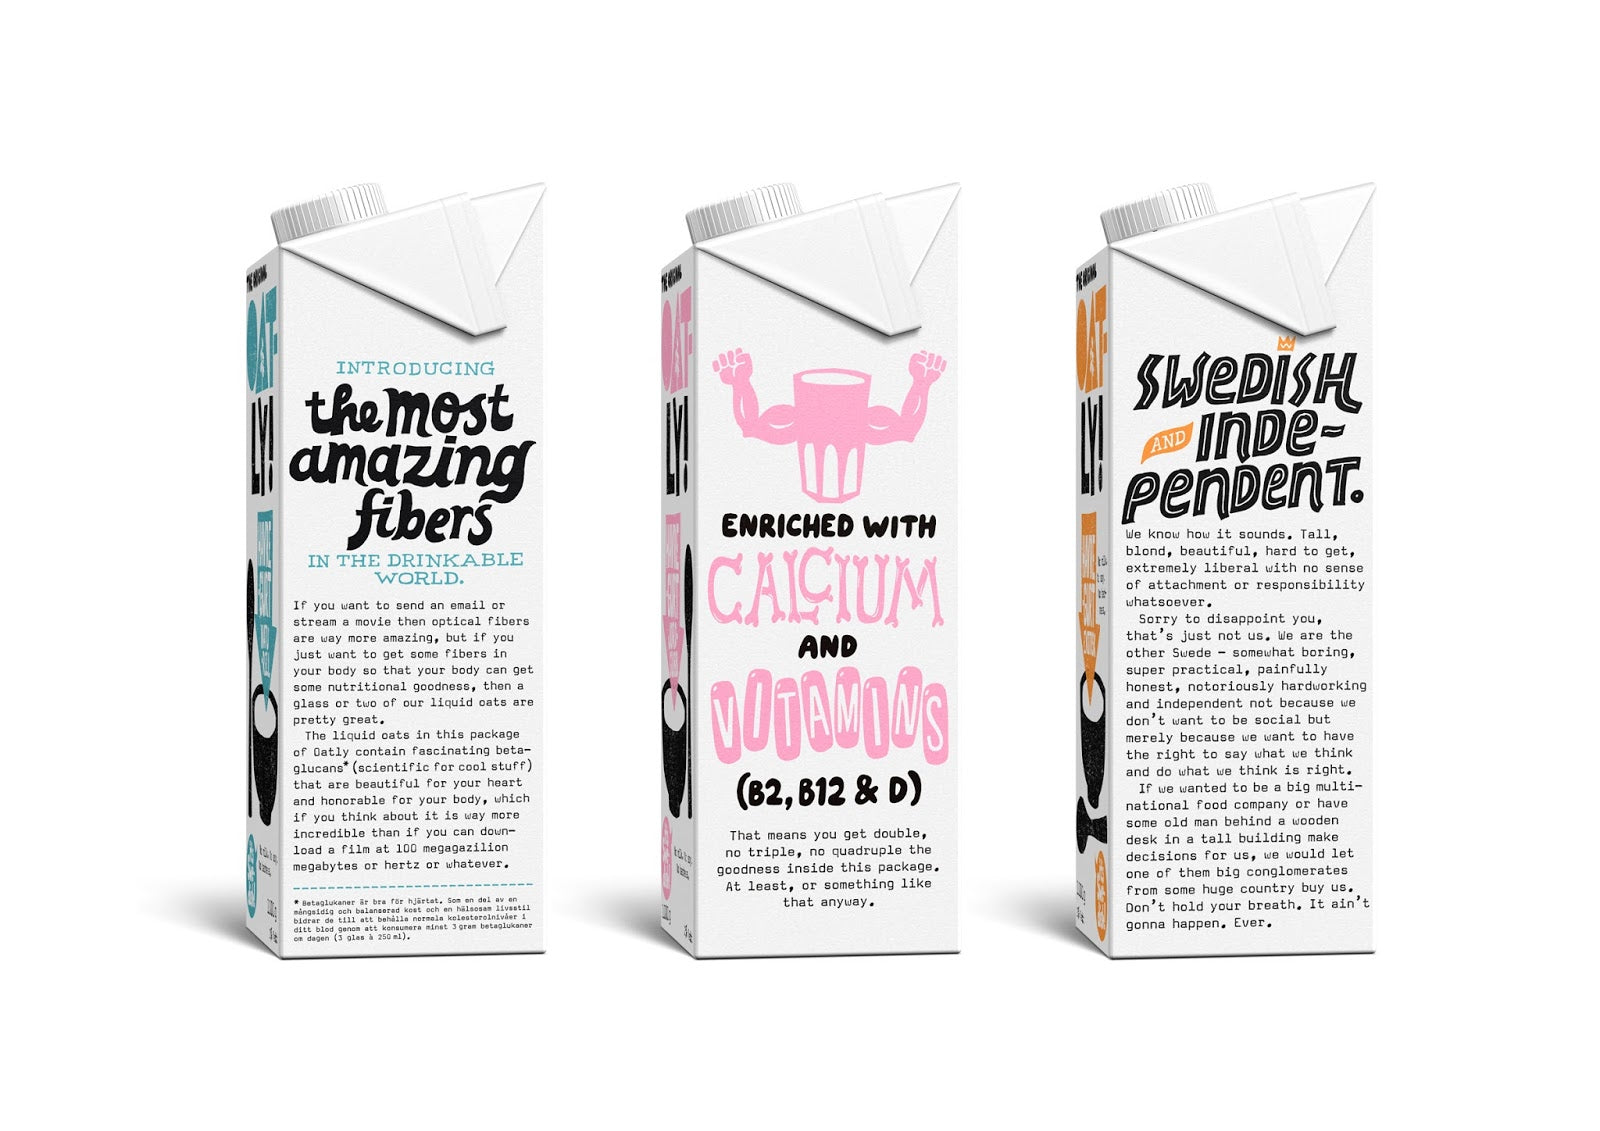 Product packaging showing brand story from Oatly oat milk